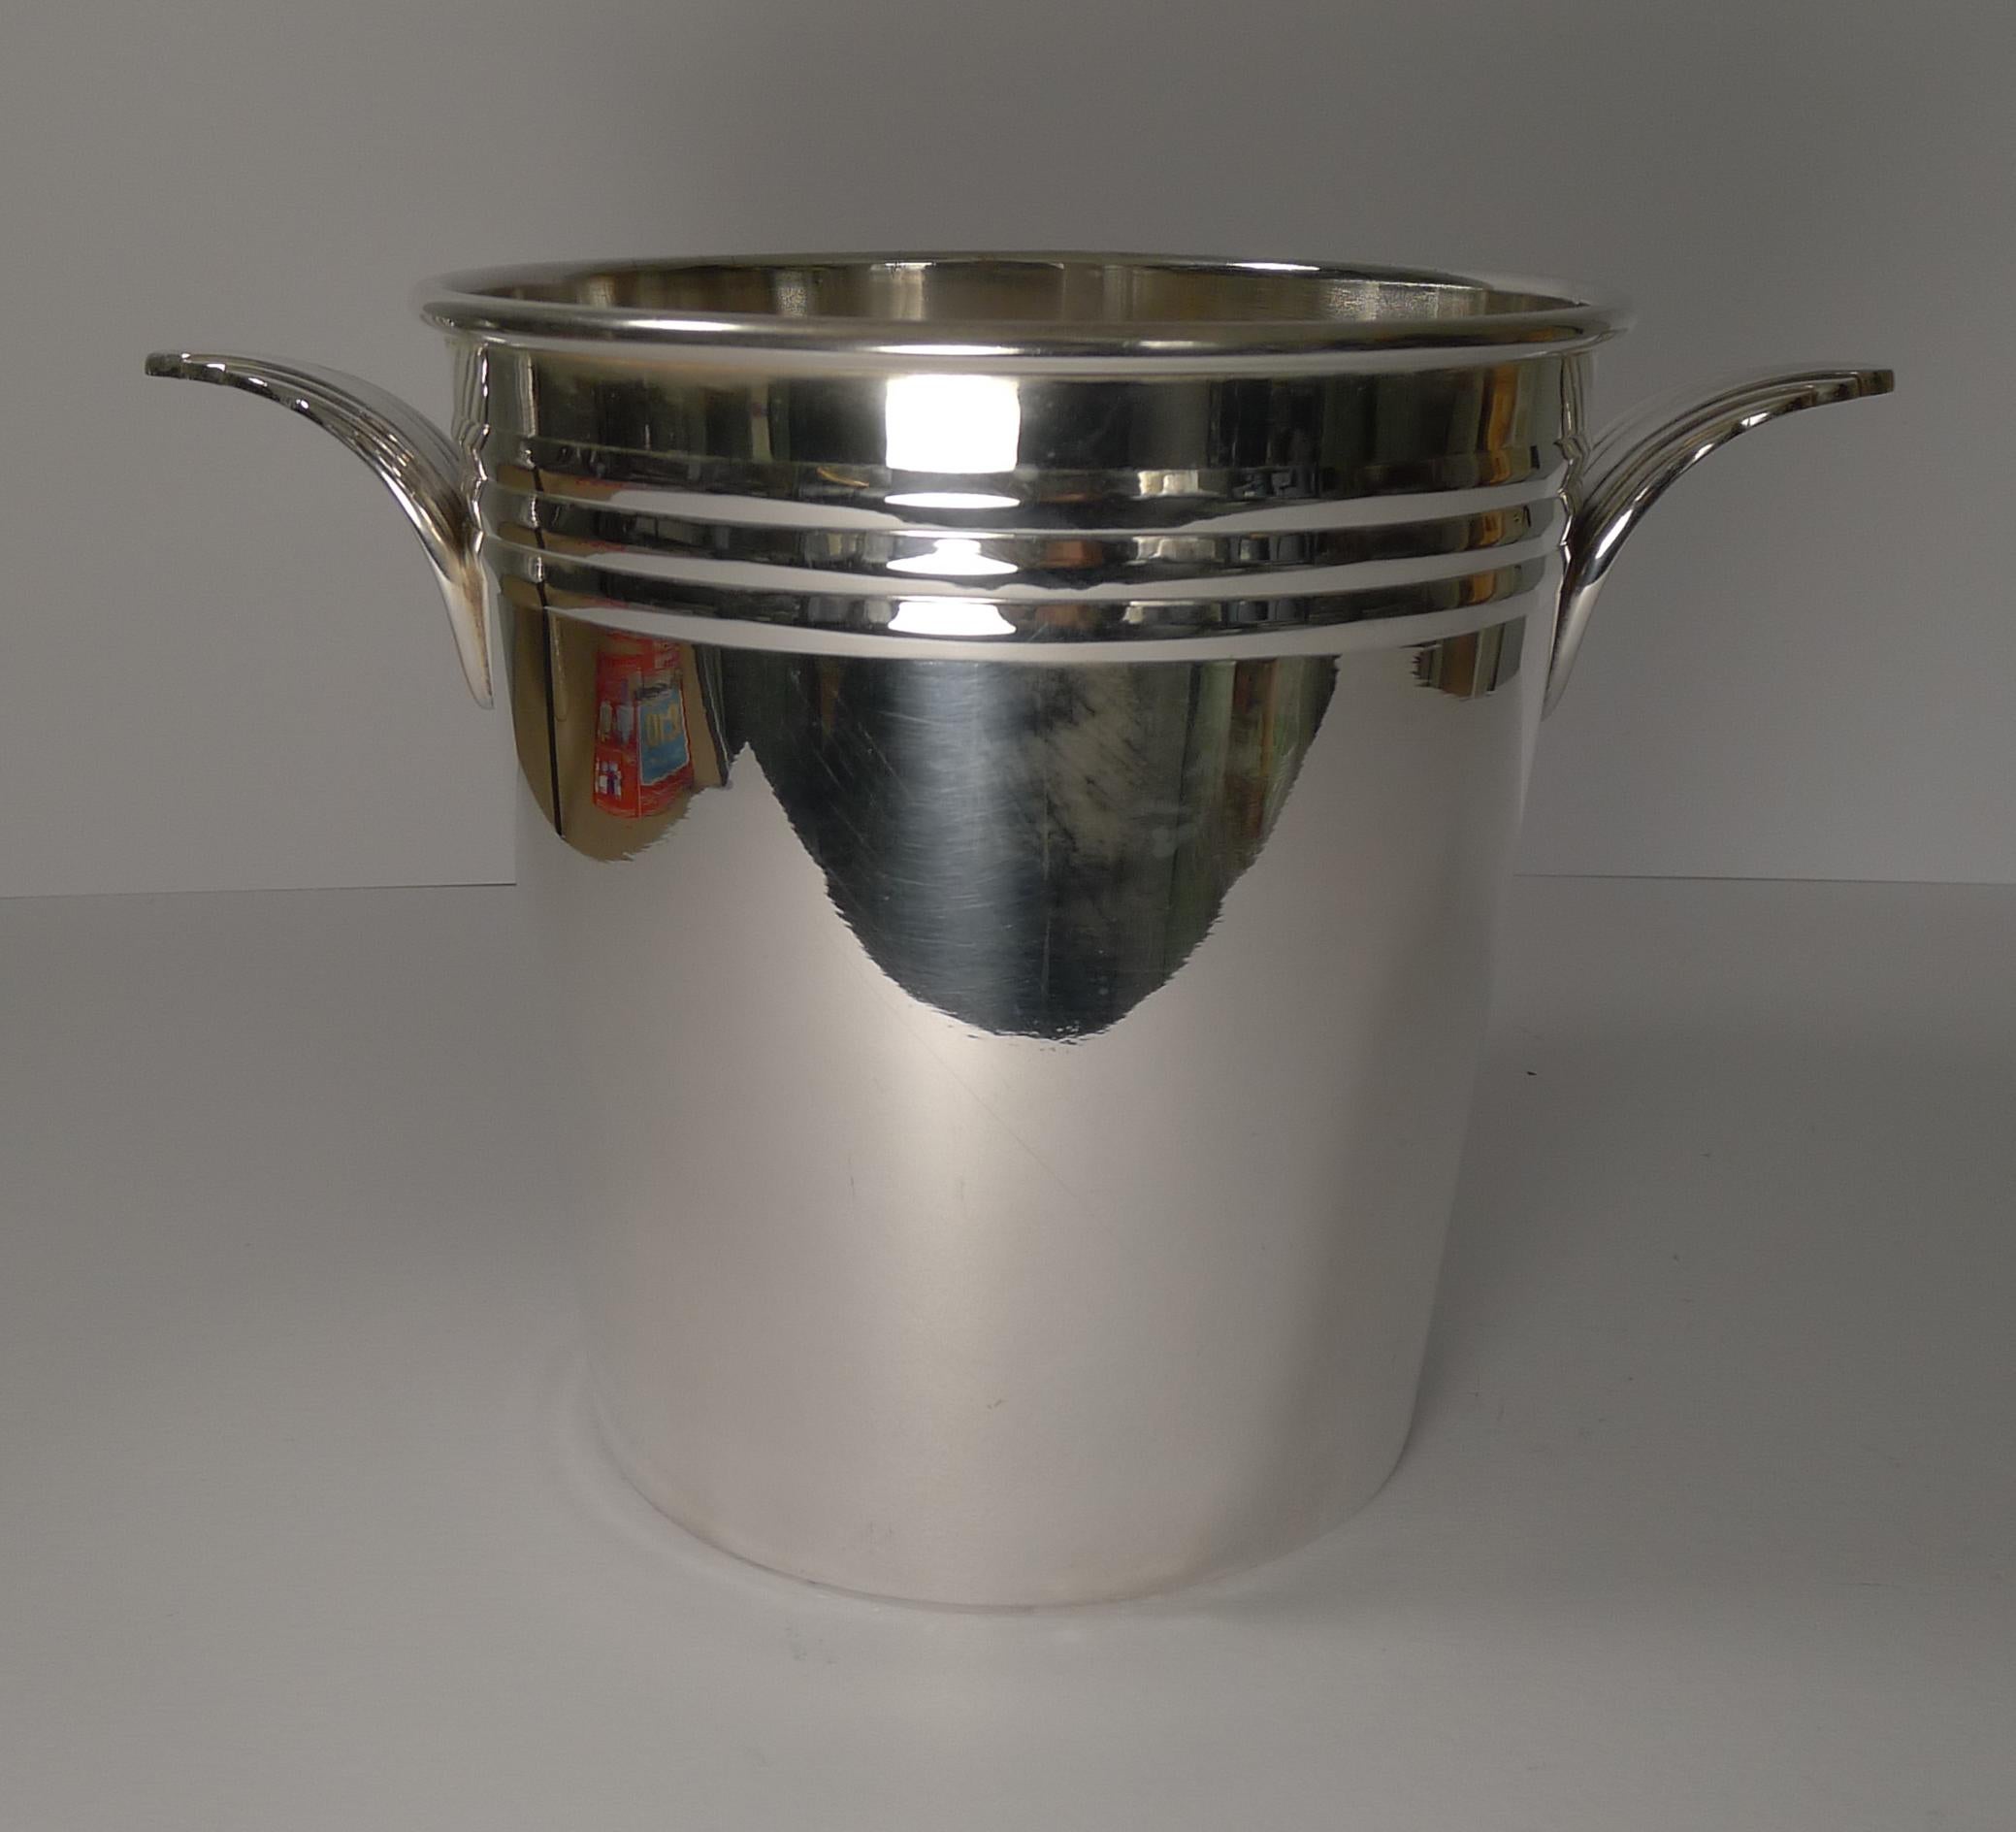 A stunning Art Deco wine cooler with fabulous Art Deco handles. Just back from our silversmith's where it has been professionally cleaned and polished, bringing it back to life.

Dating to the 1930s it remains in excellent condition with minor